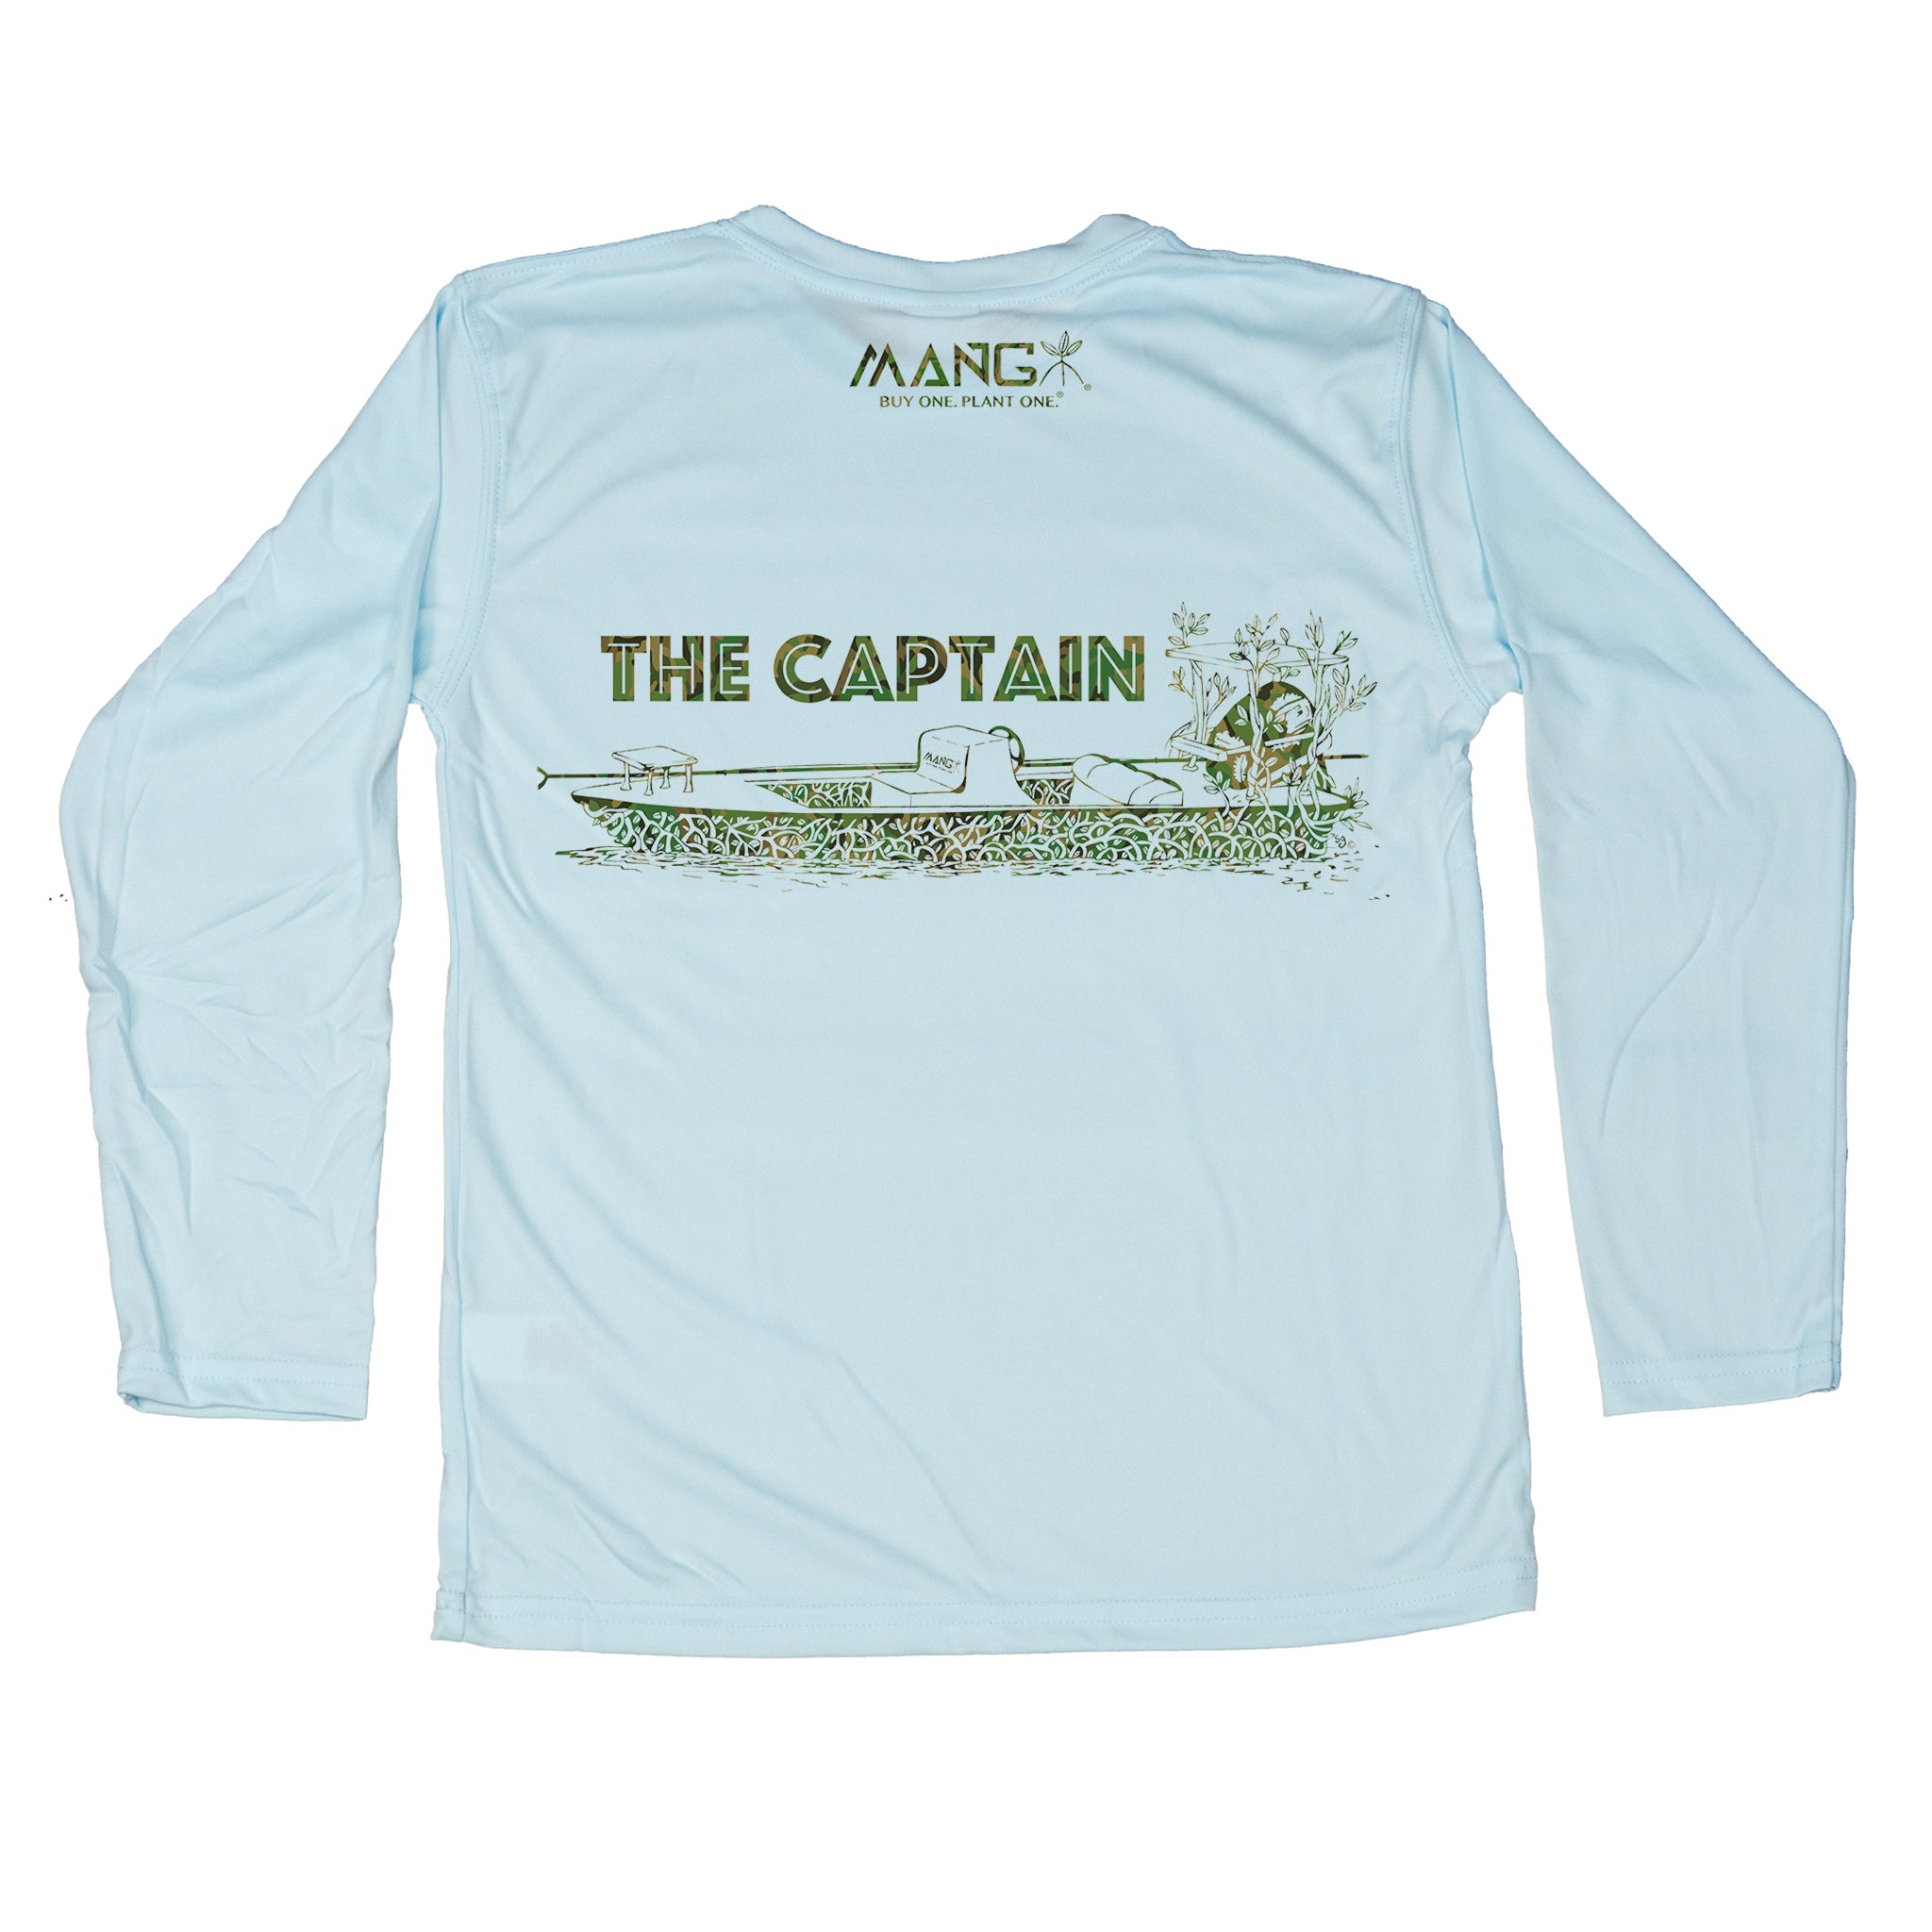 MANG The Captain Toddler - 2T-Arctic Blue